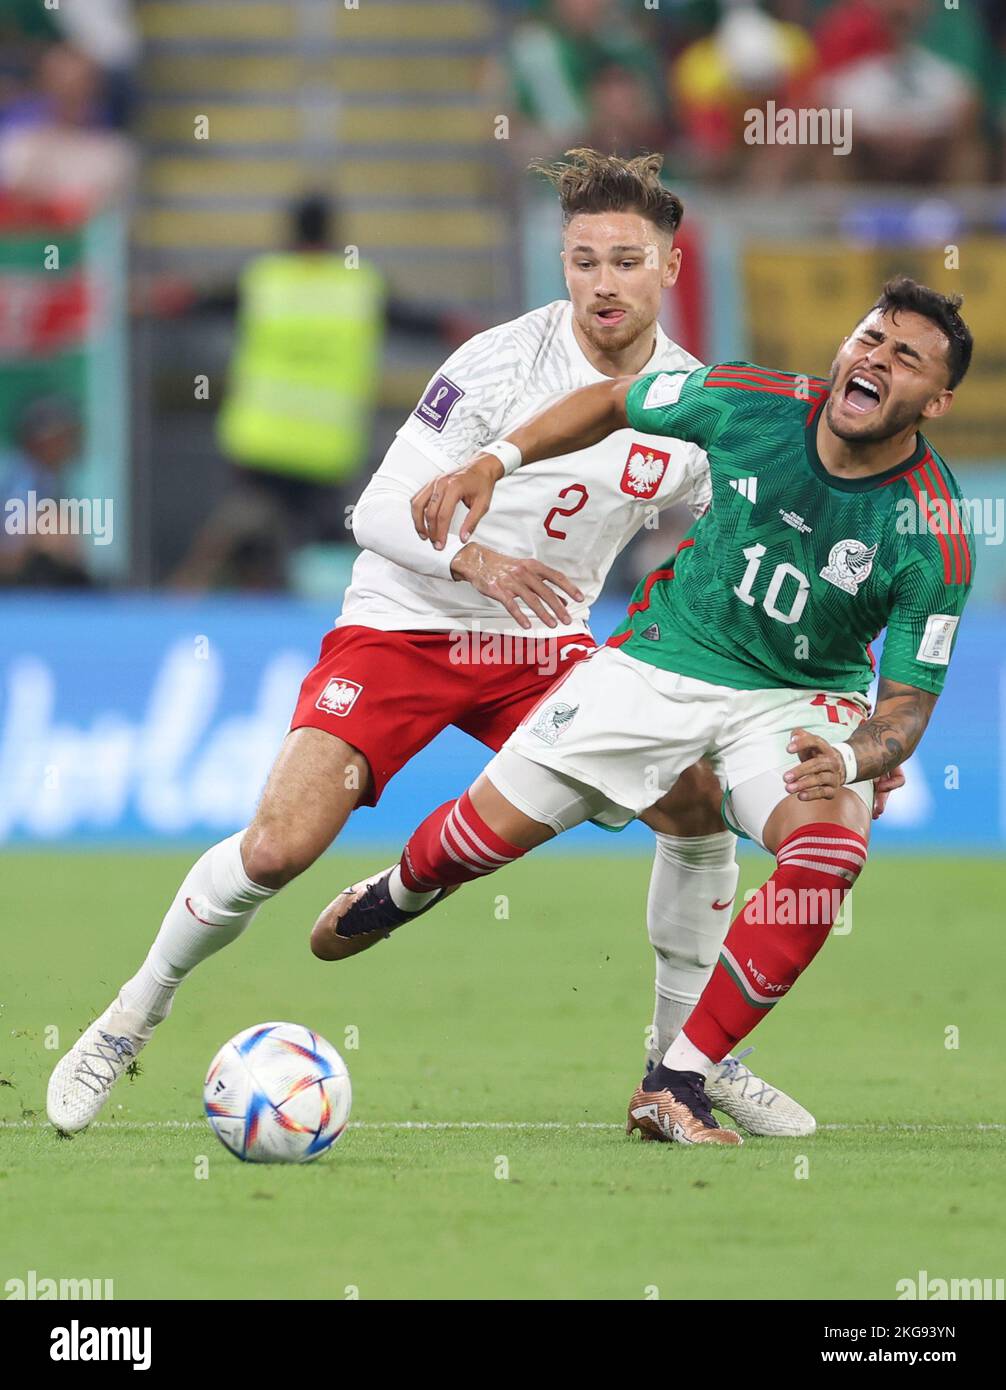 Doha, Qatar. 22nd Nov, 2022. Alexis Vega (R) of Mexico vies with Matty Cash of Poland during the Group C match between Mexico and Poland of the 2022 FIFA World Cup at Ras Abu Aboud (974) Stadium in Doha, Qatar, Nov. 22, 2022. Credit: Jia Haocheng/Xinhua/Alamy Live News Stock Photo